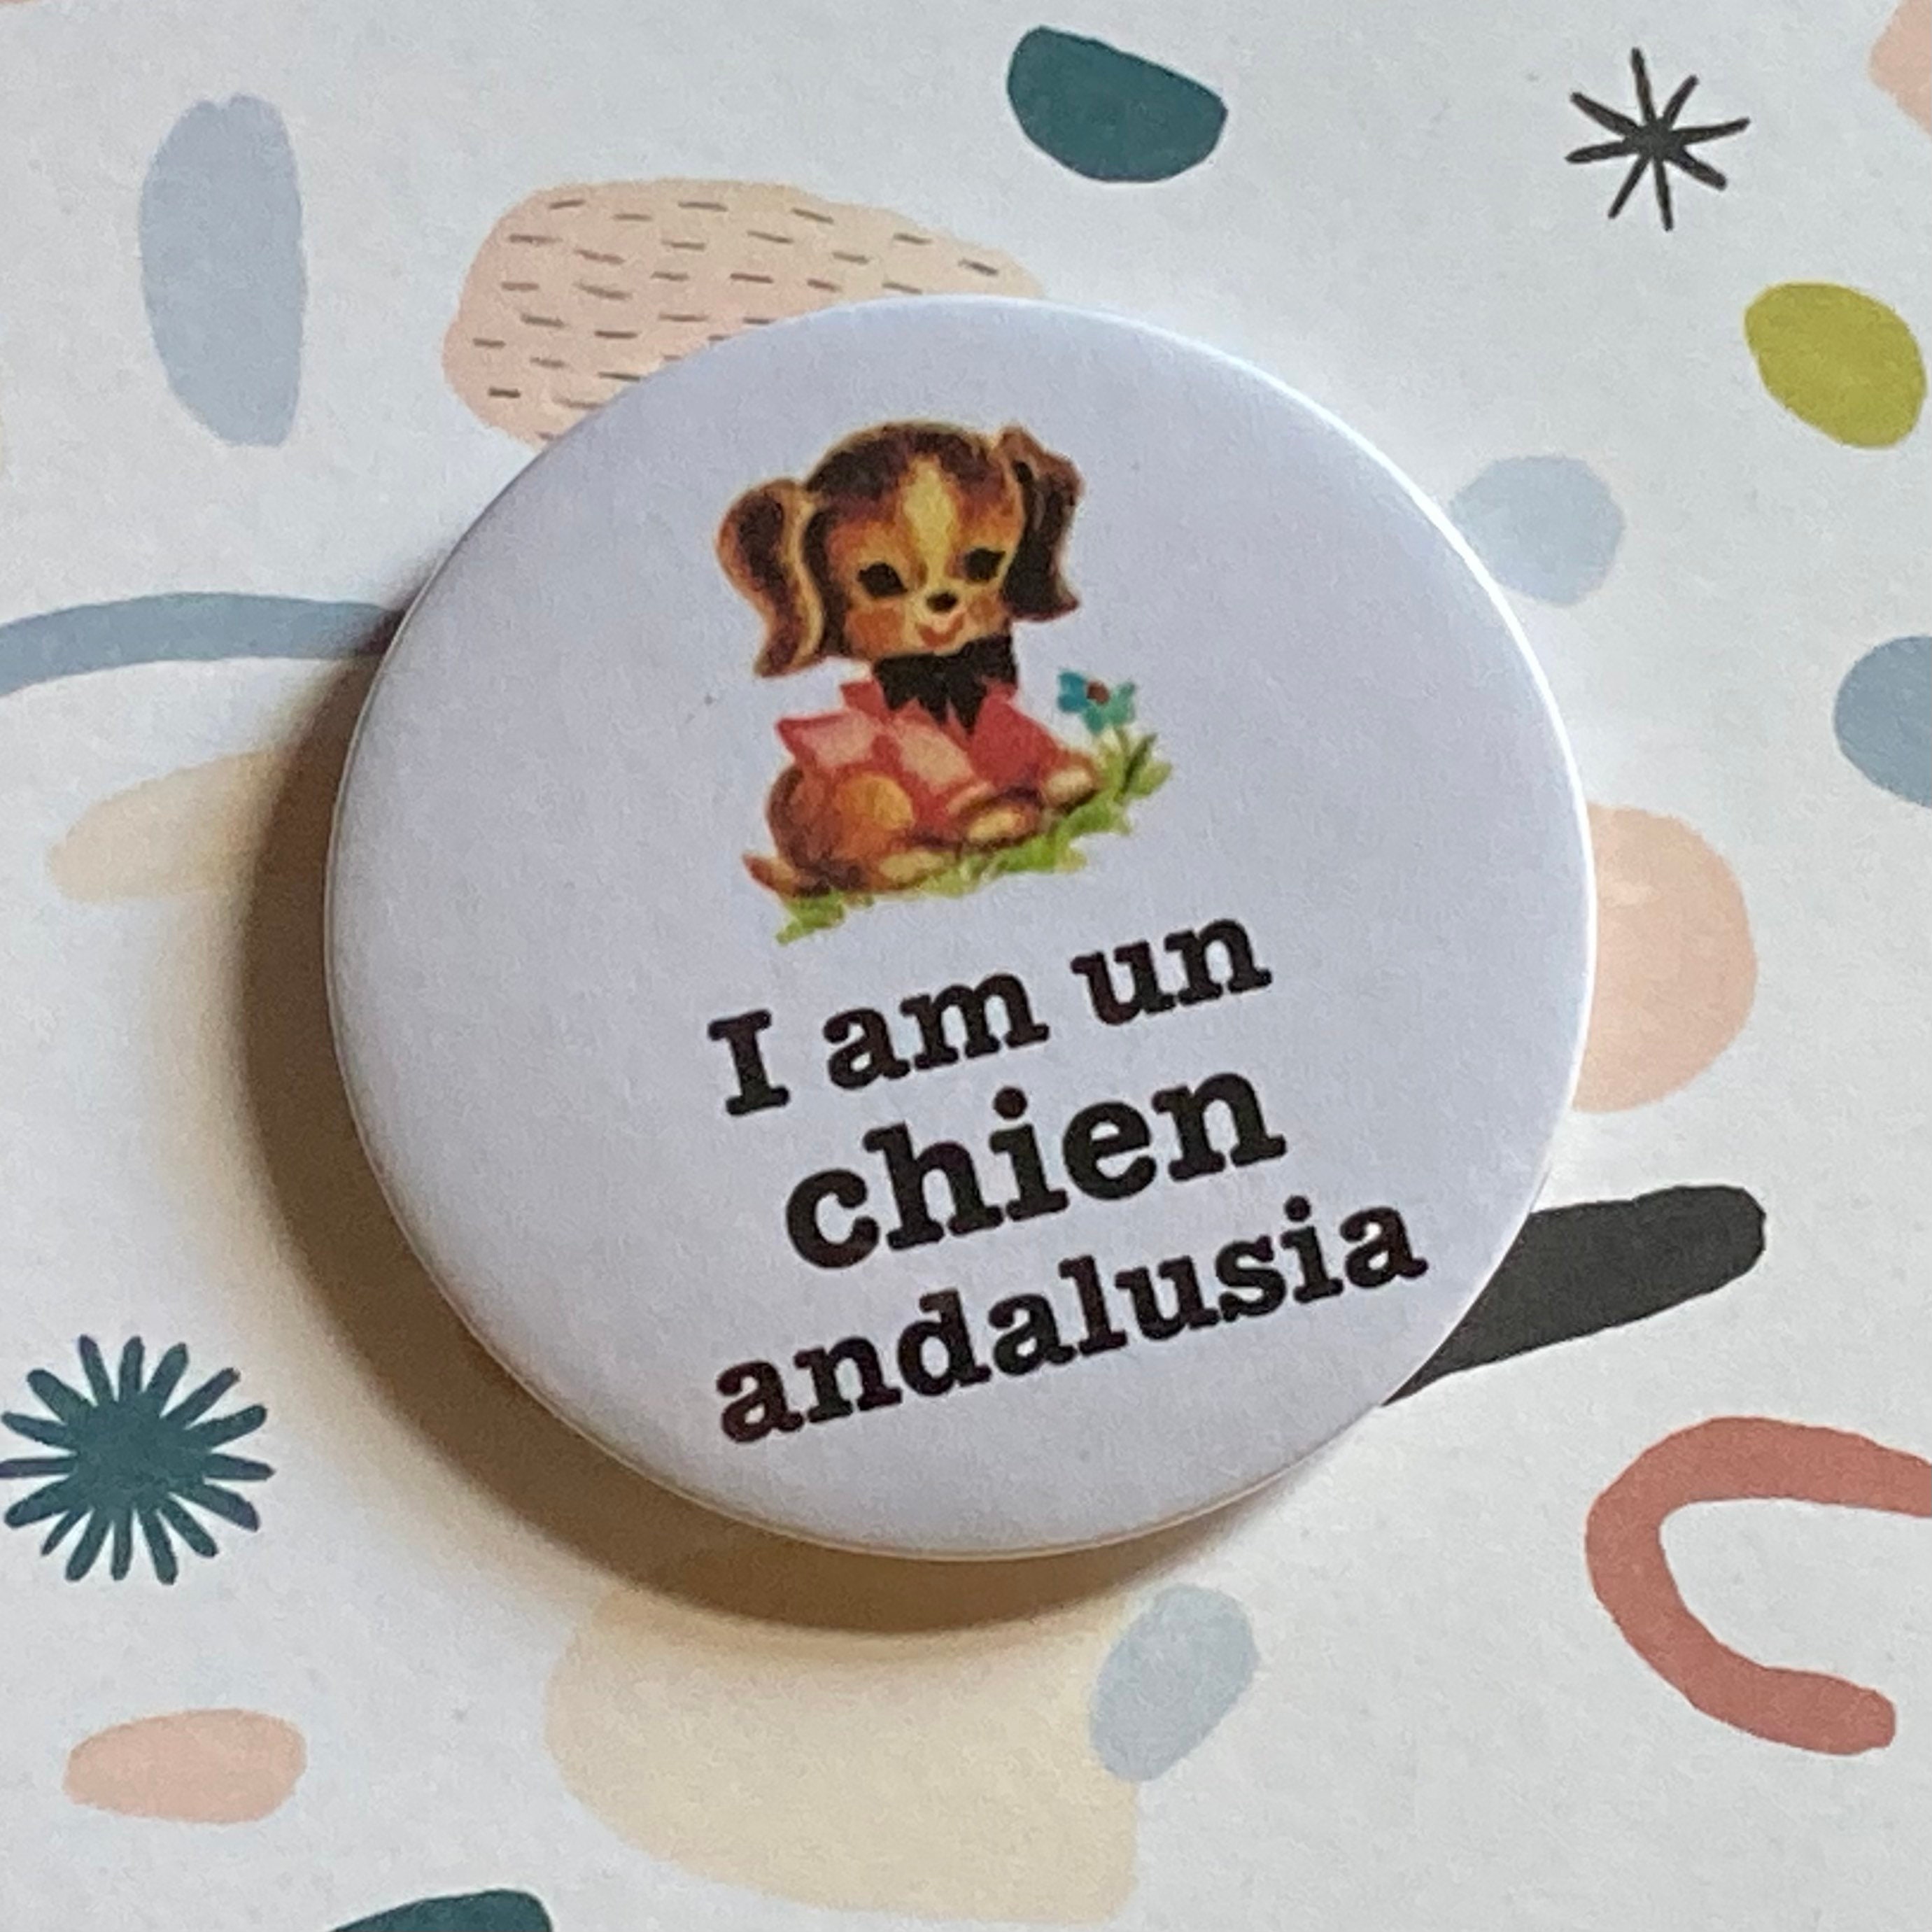 Vintage Mash-up Pin Badge I Am Un Chien Andalusia pixies 